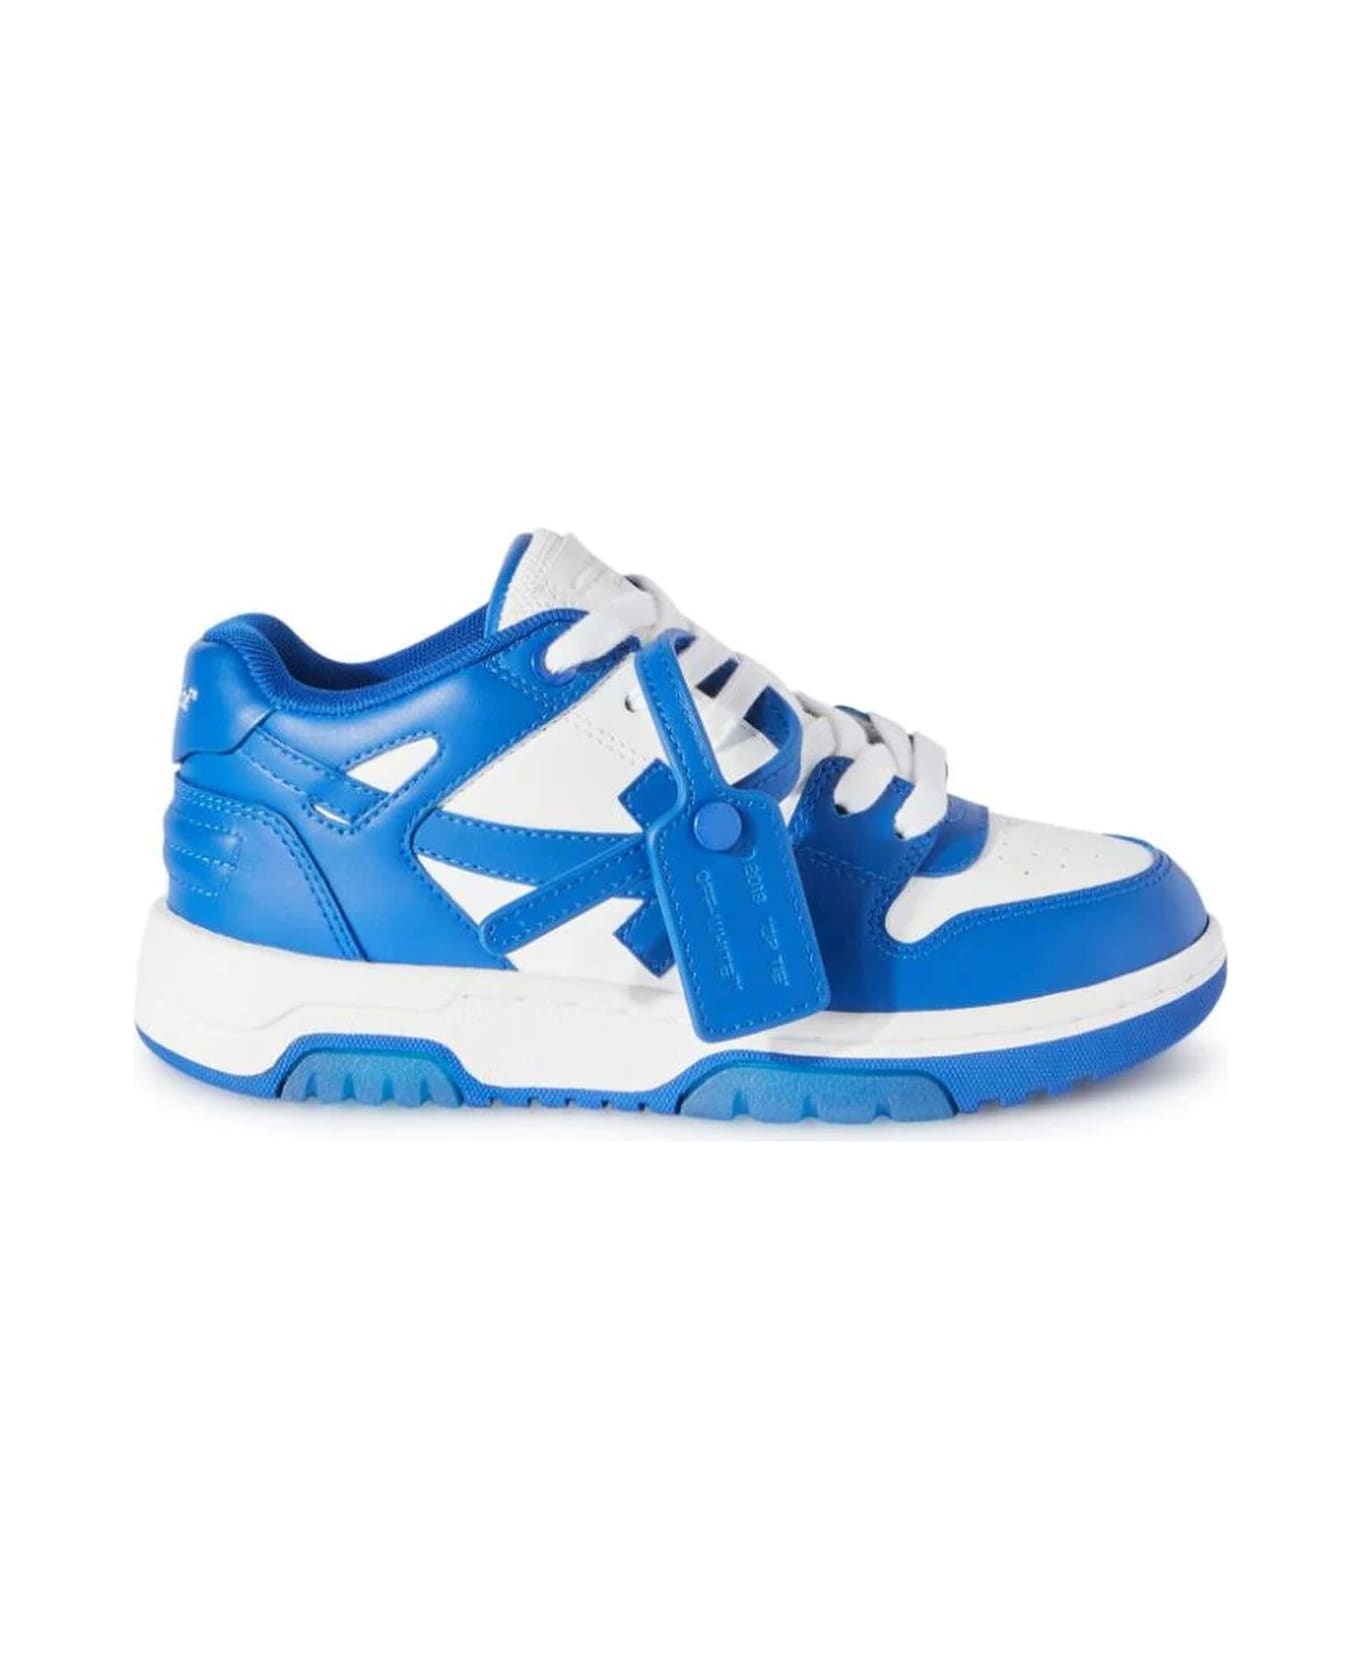 Off-White Off White Sneakers Blue - Blue シューズ